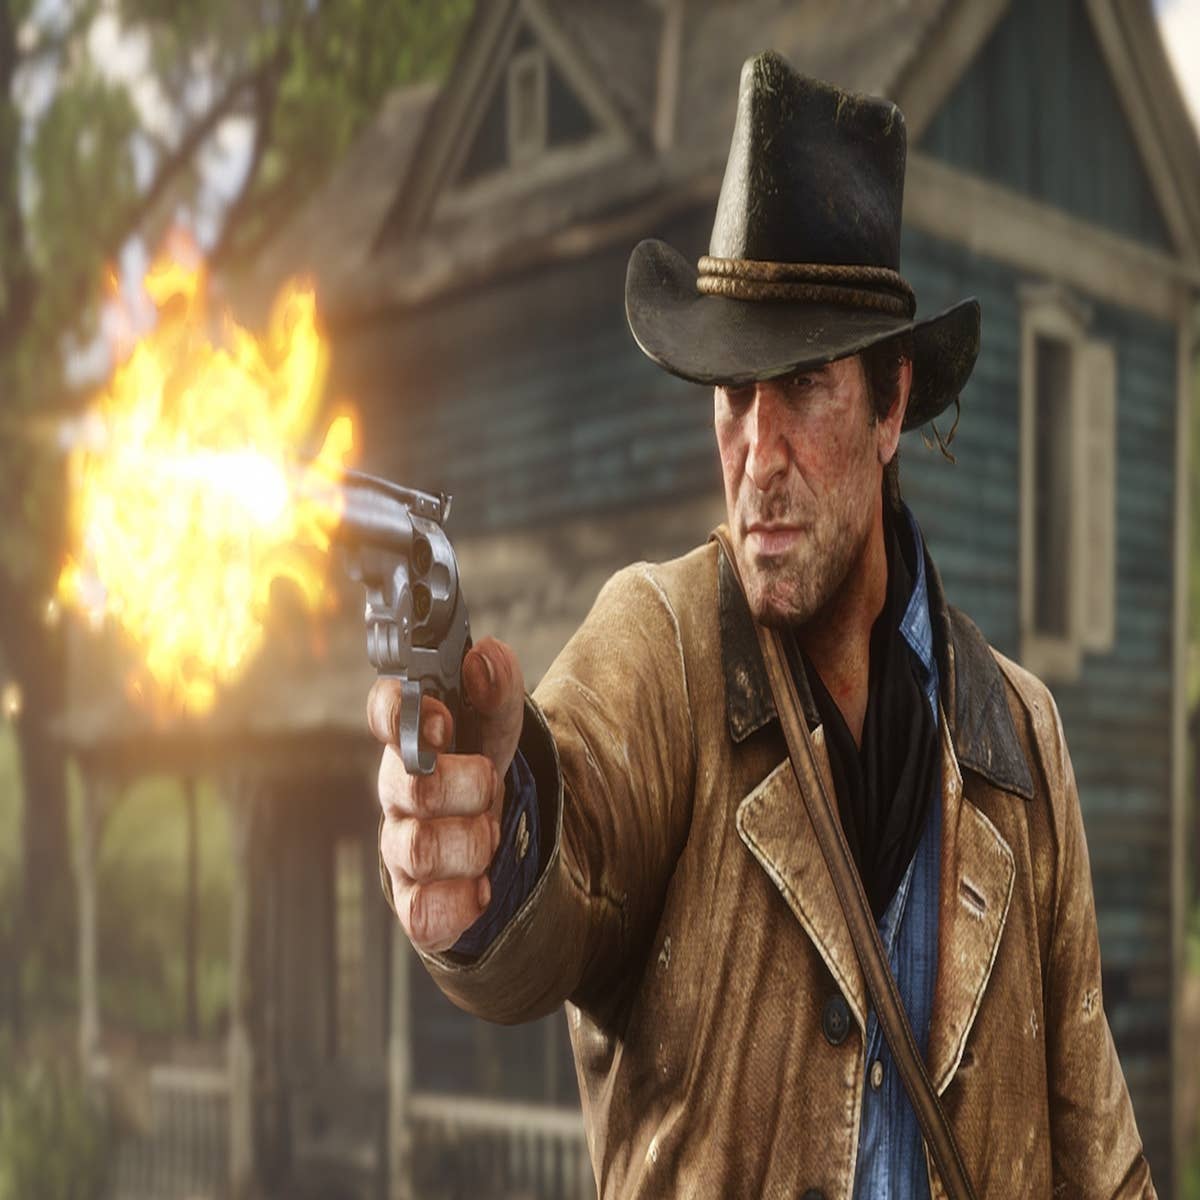 What does it take to run Red Dead Redemption 2 PC at 60fps